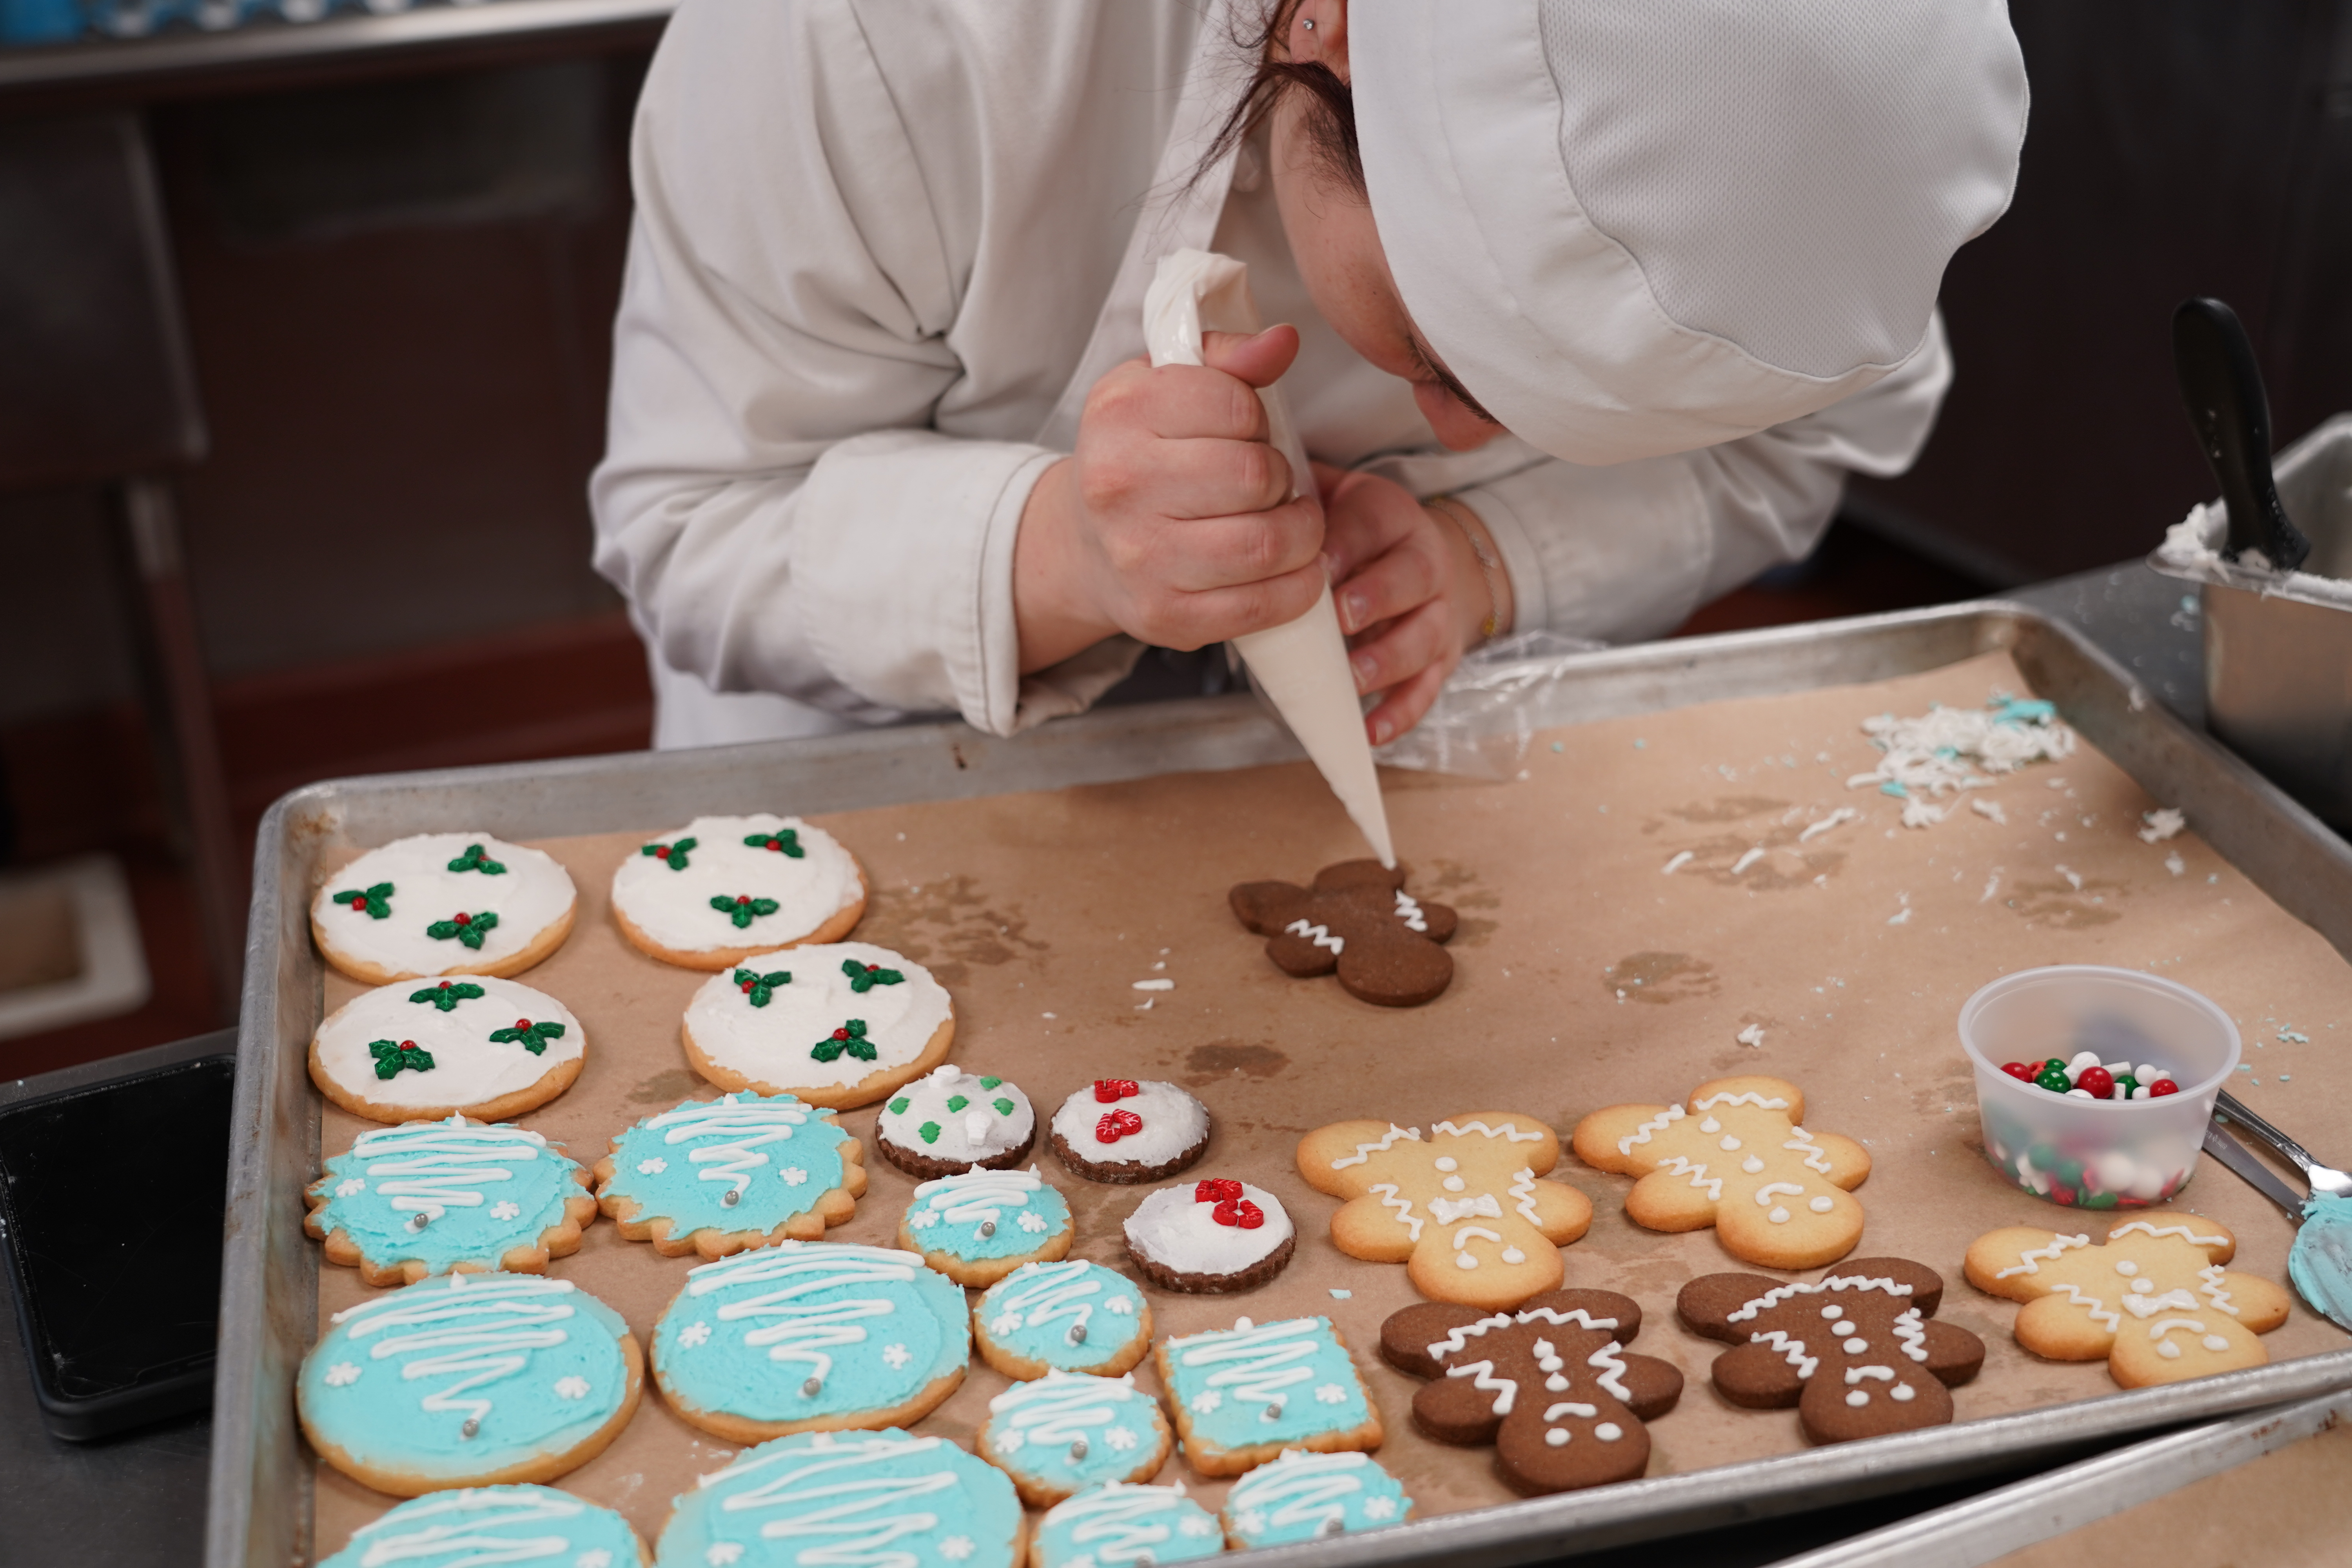 A student pipes royal icing onto a cookie on a sheet pan of decorated cookies